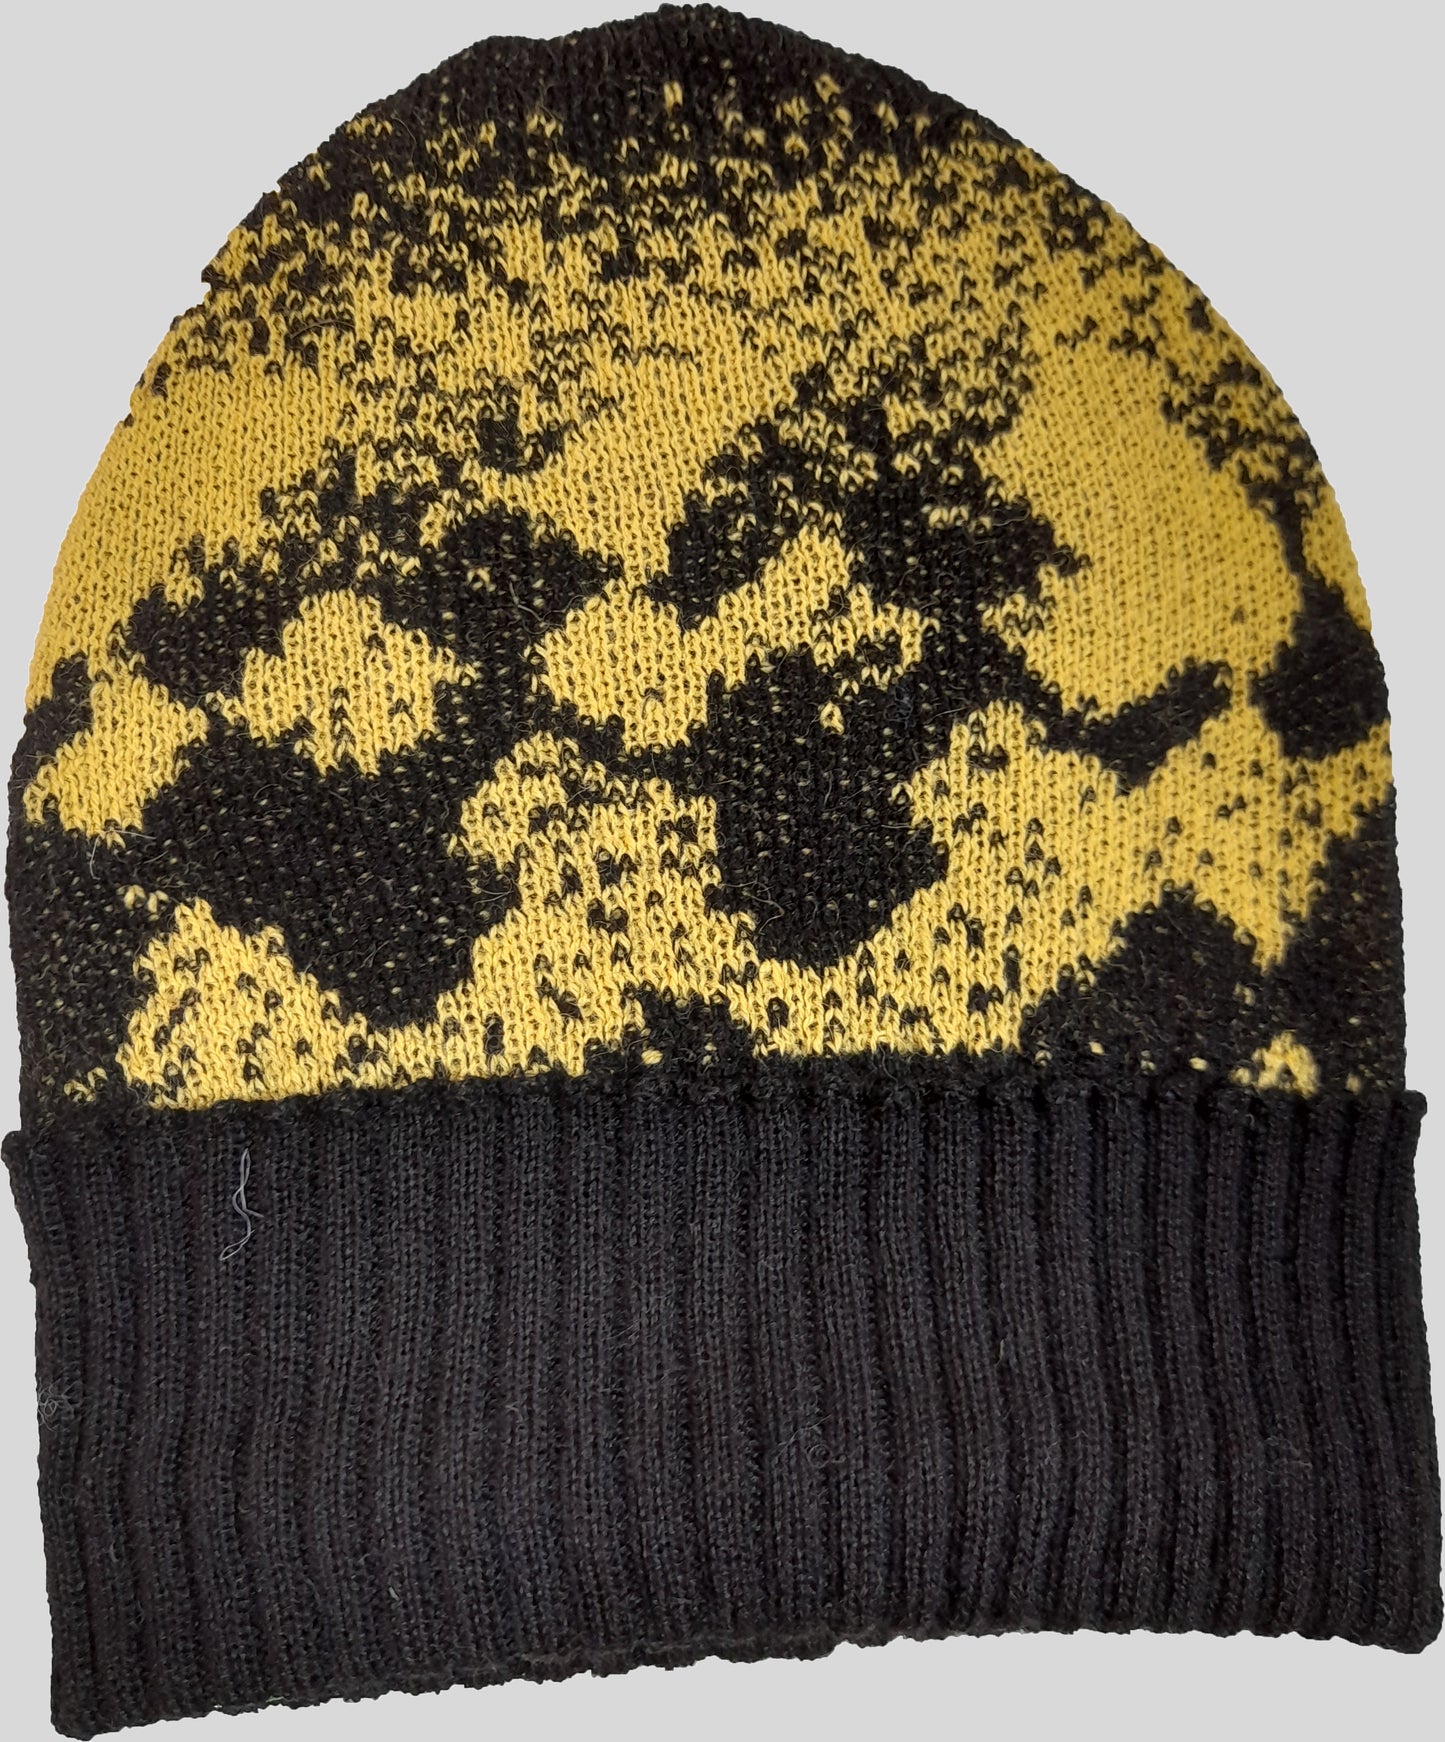 SOLD OUT Alpaca Unisex Beanie Yellow